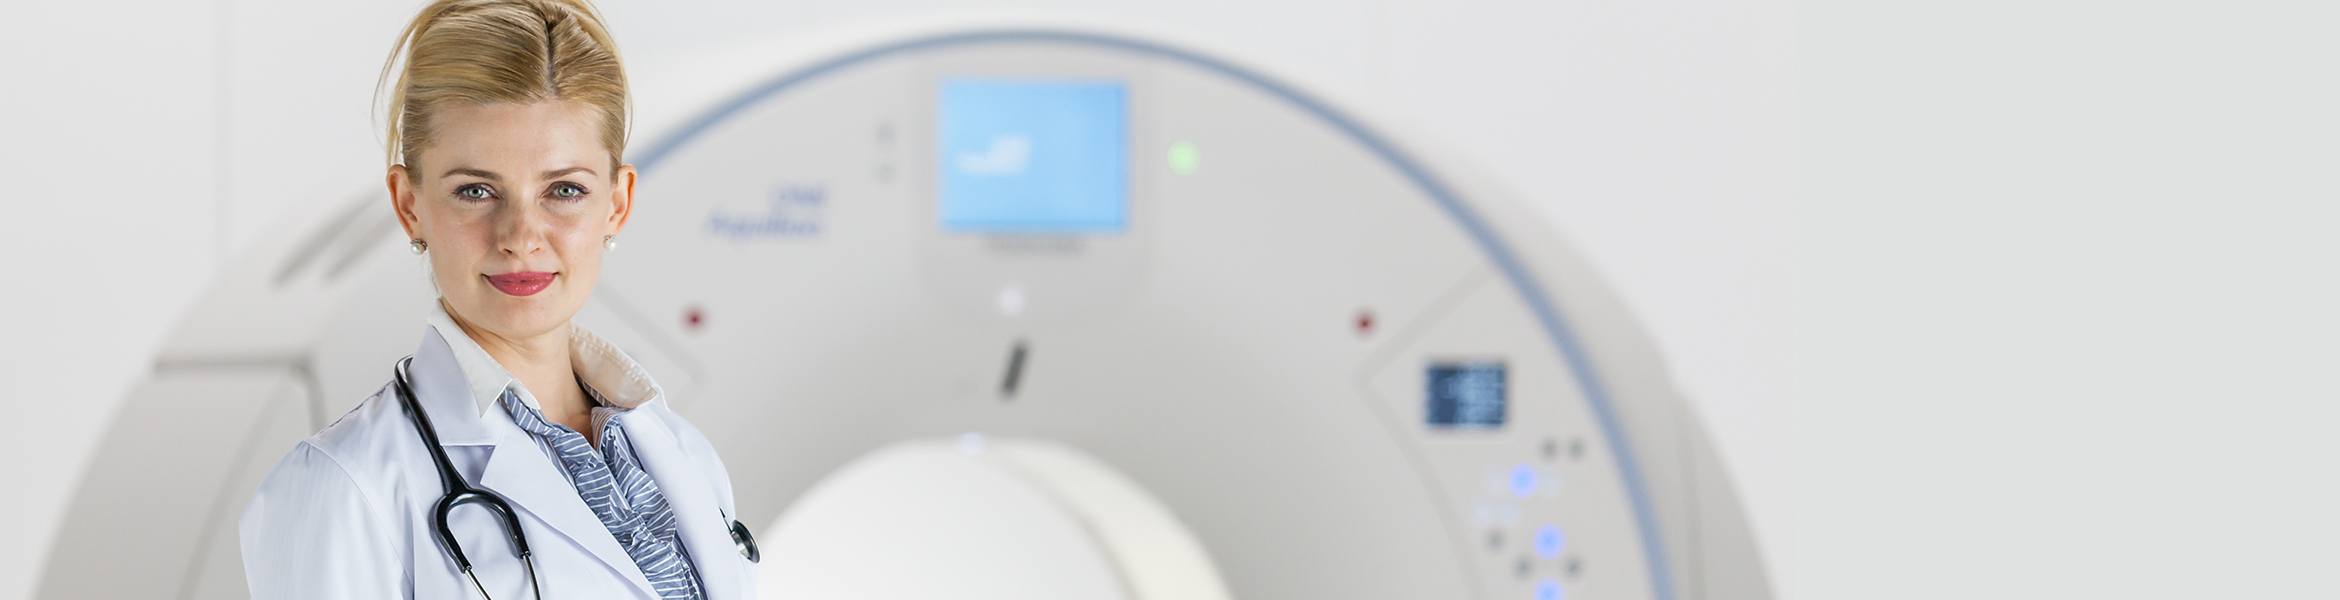 Oncology Solutions: Imaging